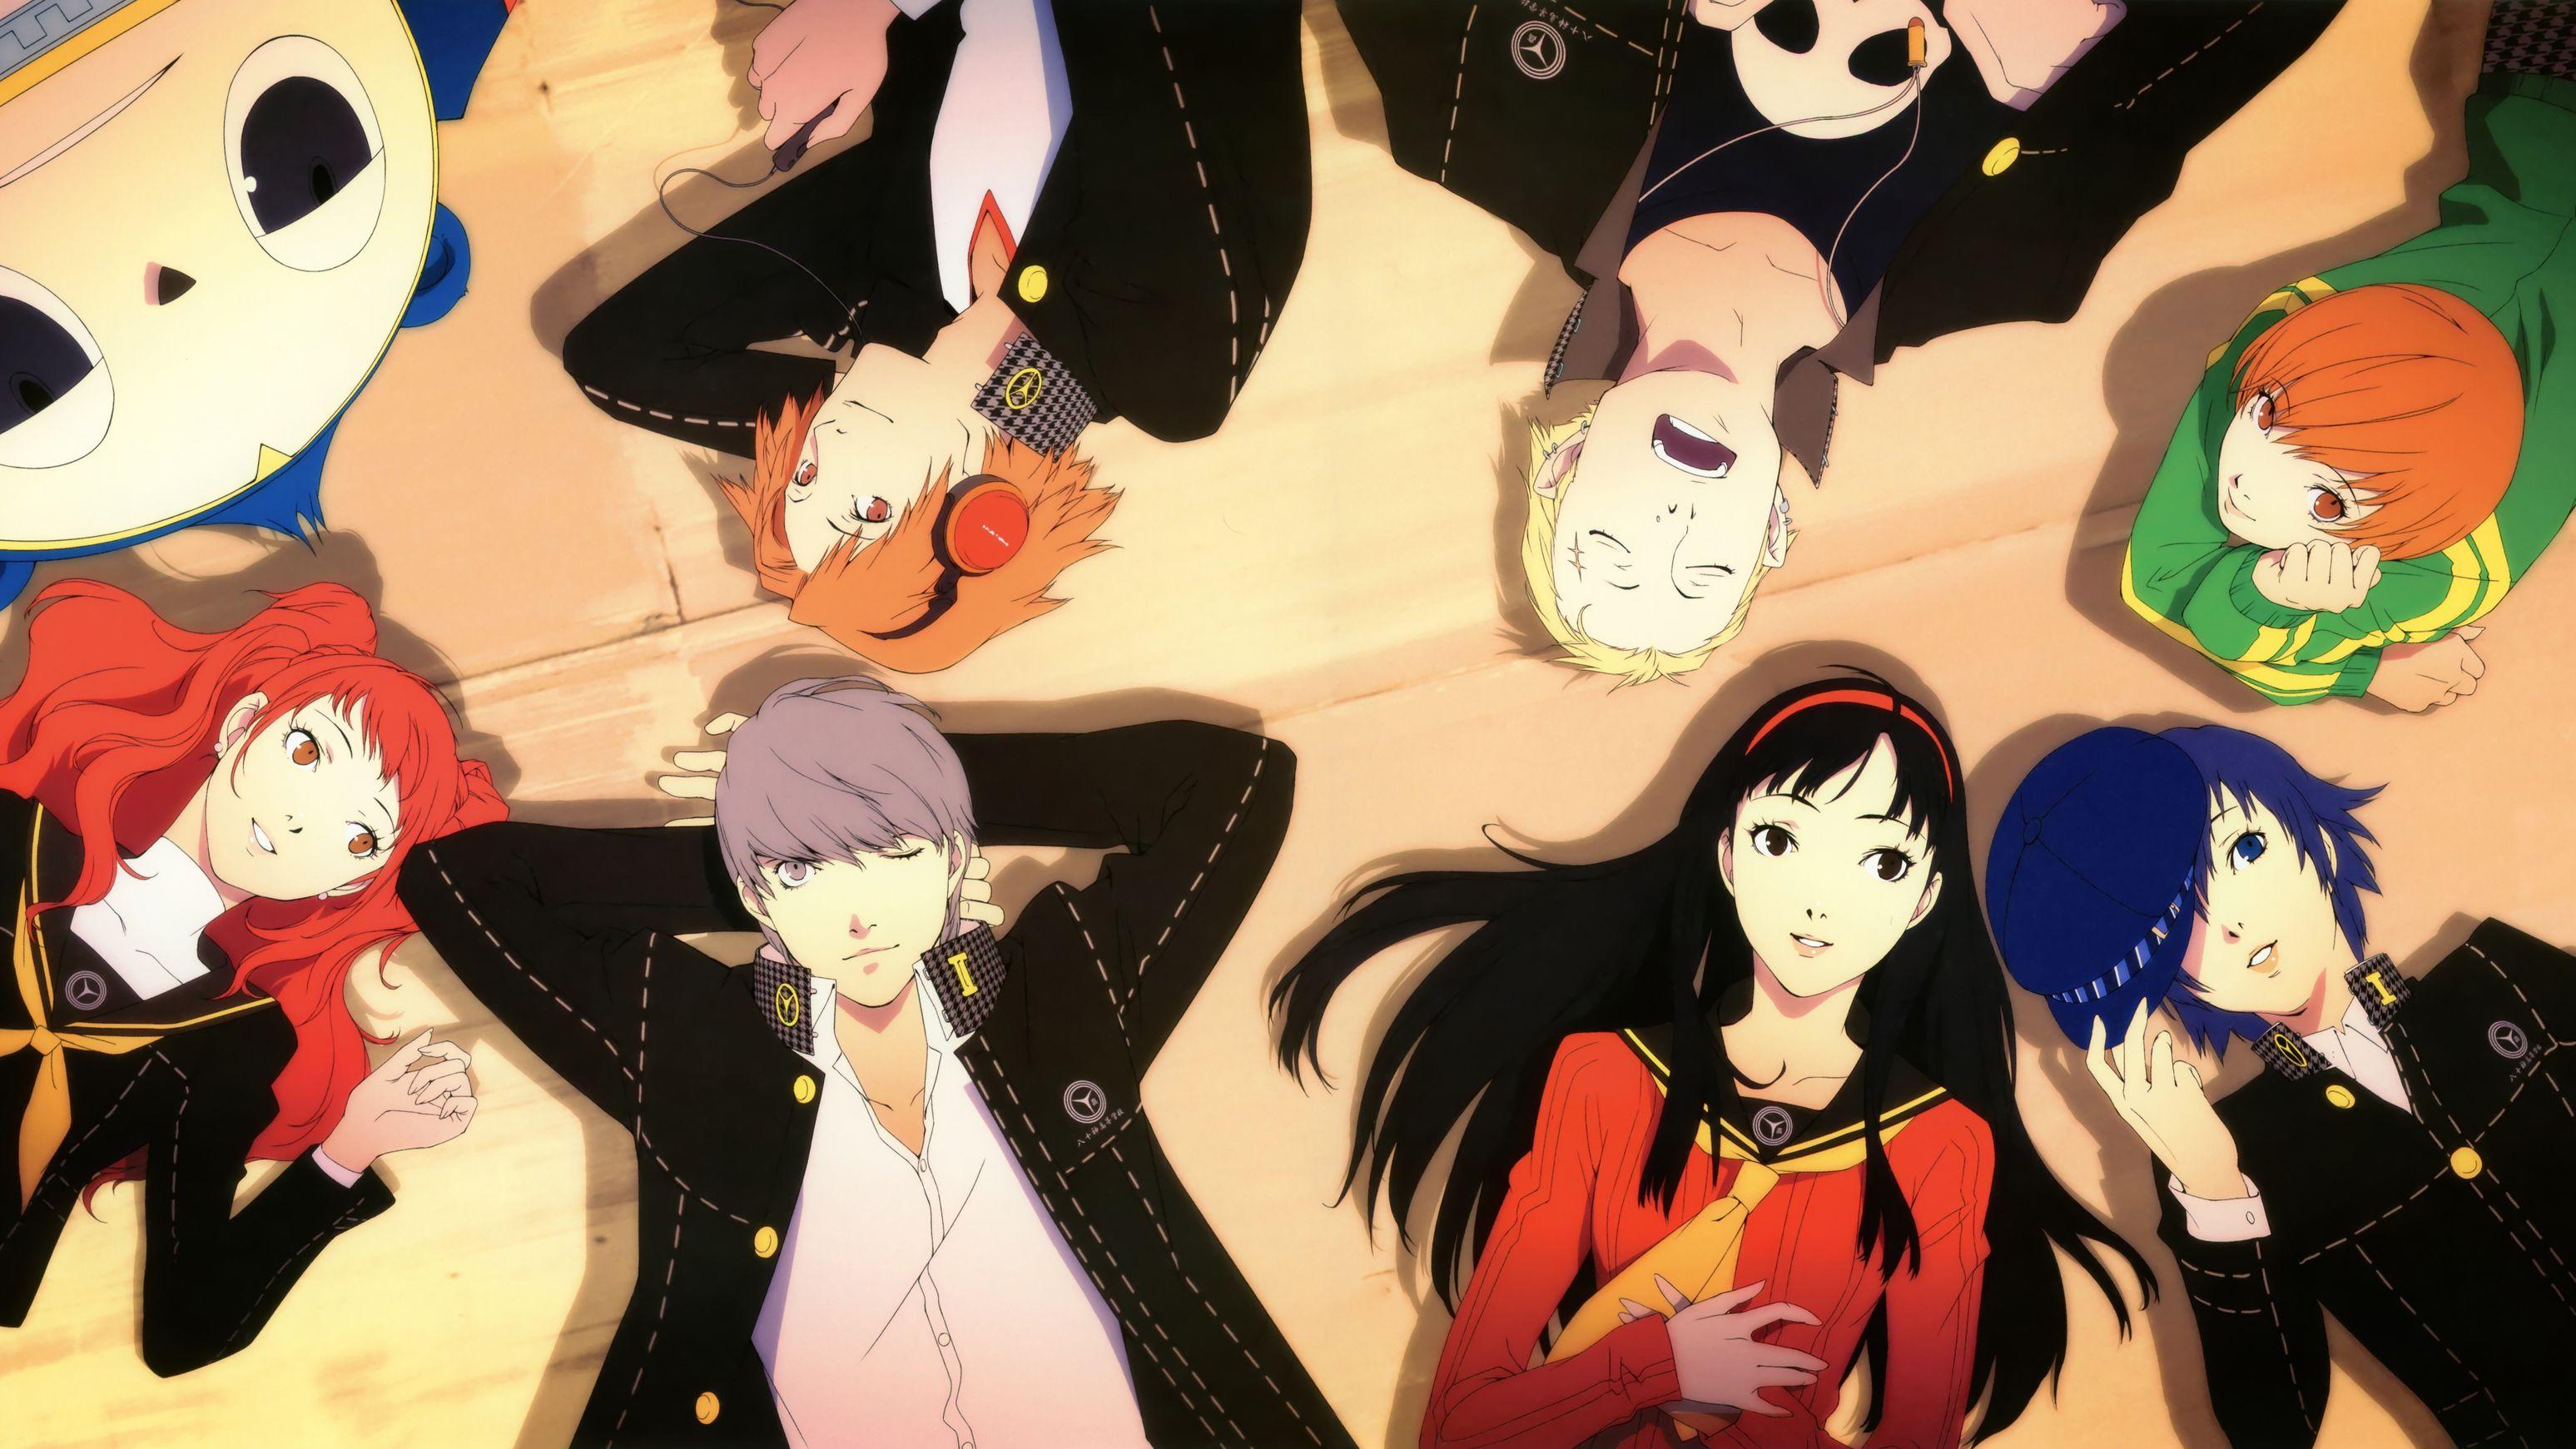 Guide: How to Unlock the True Ending and Epilogue in Persona 4